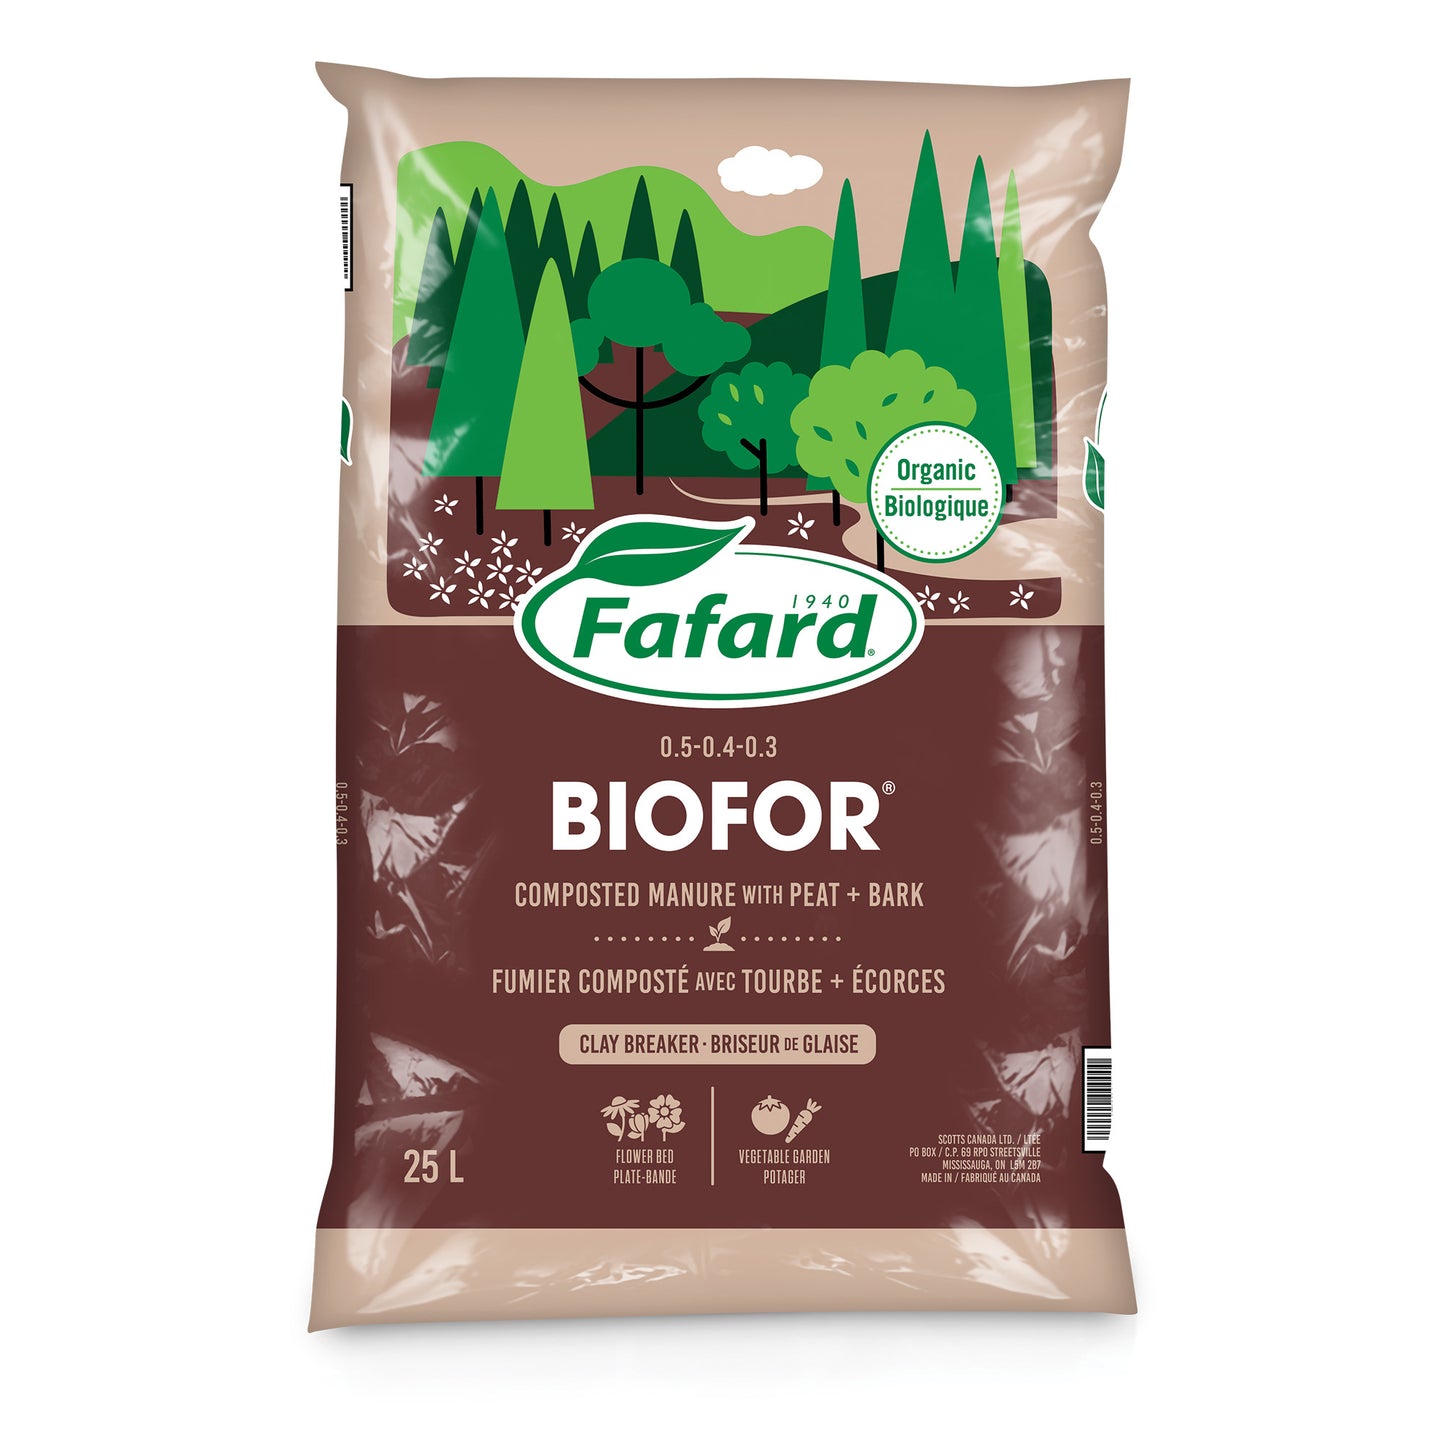 BIOFOR® Composted manure with peat and bark